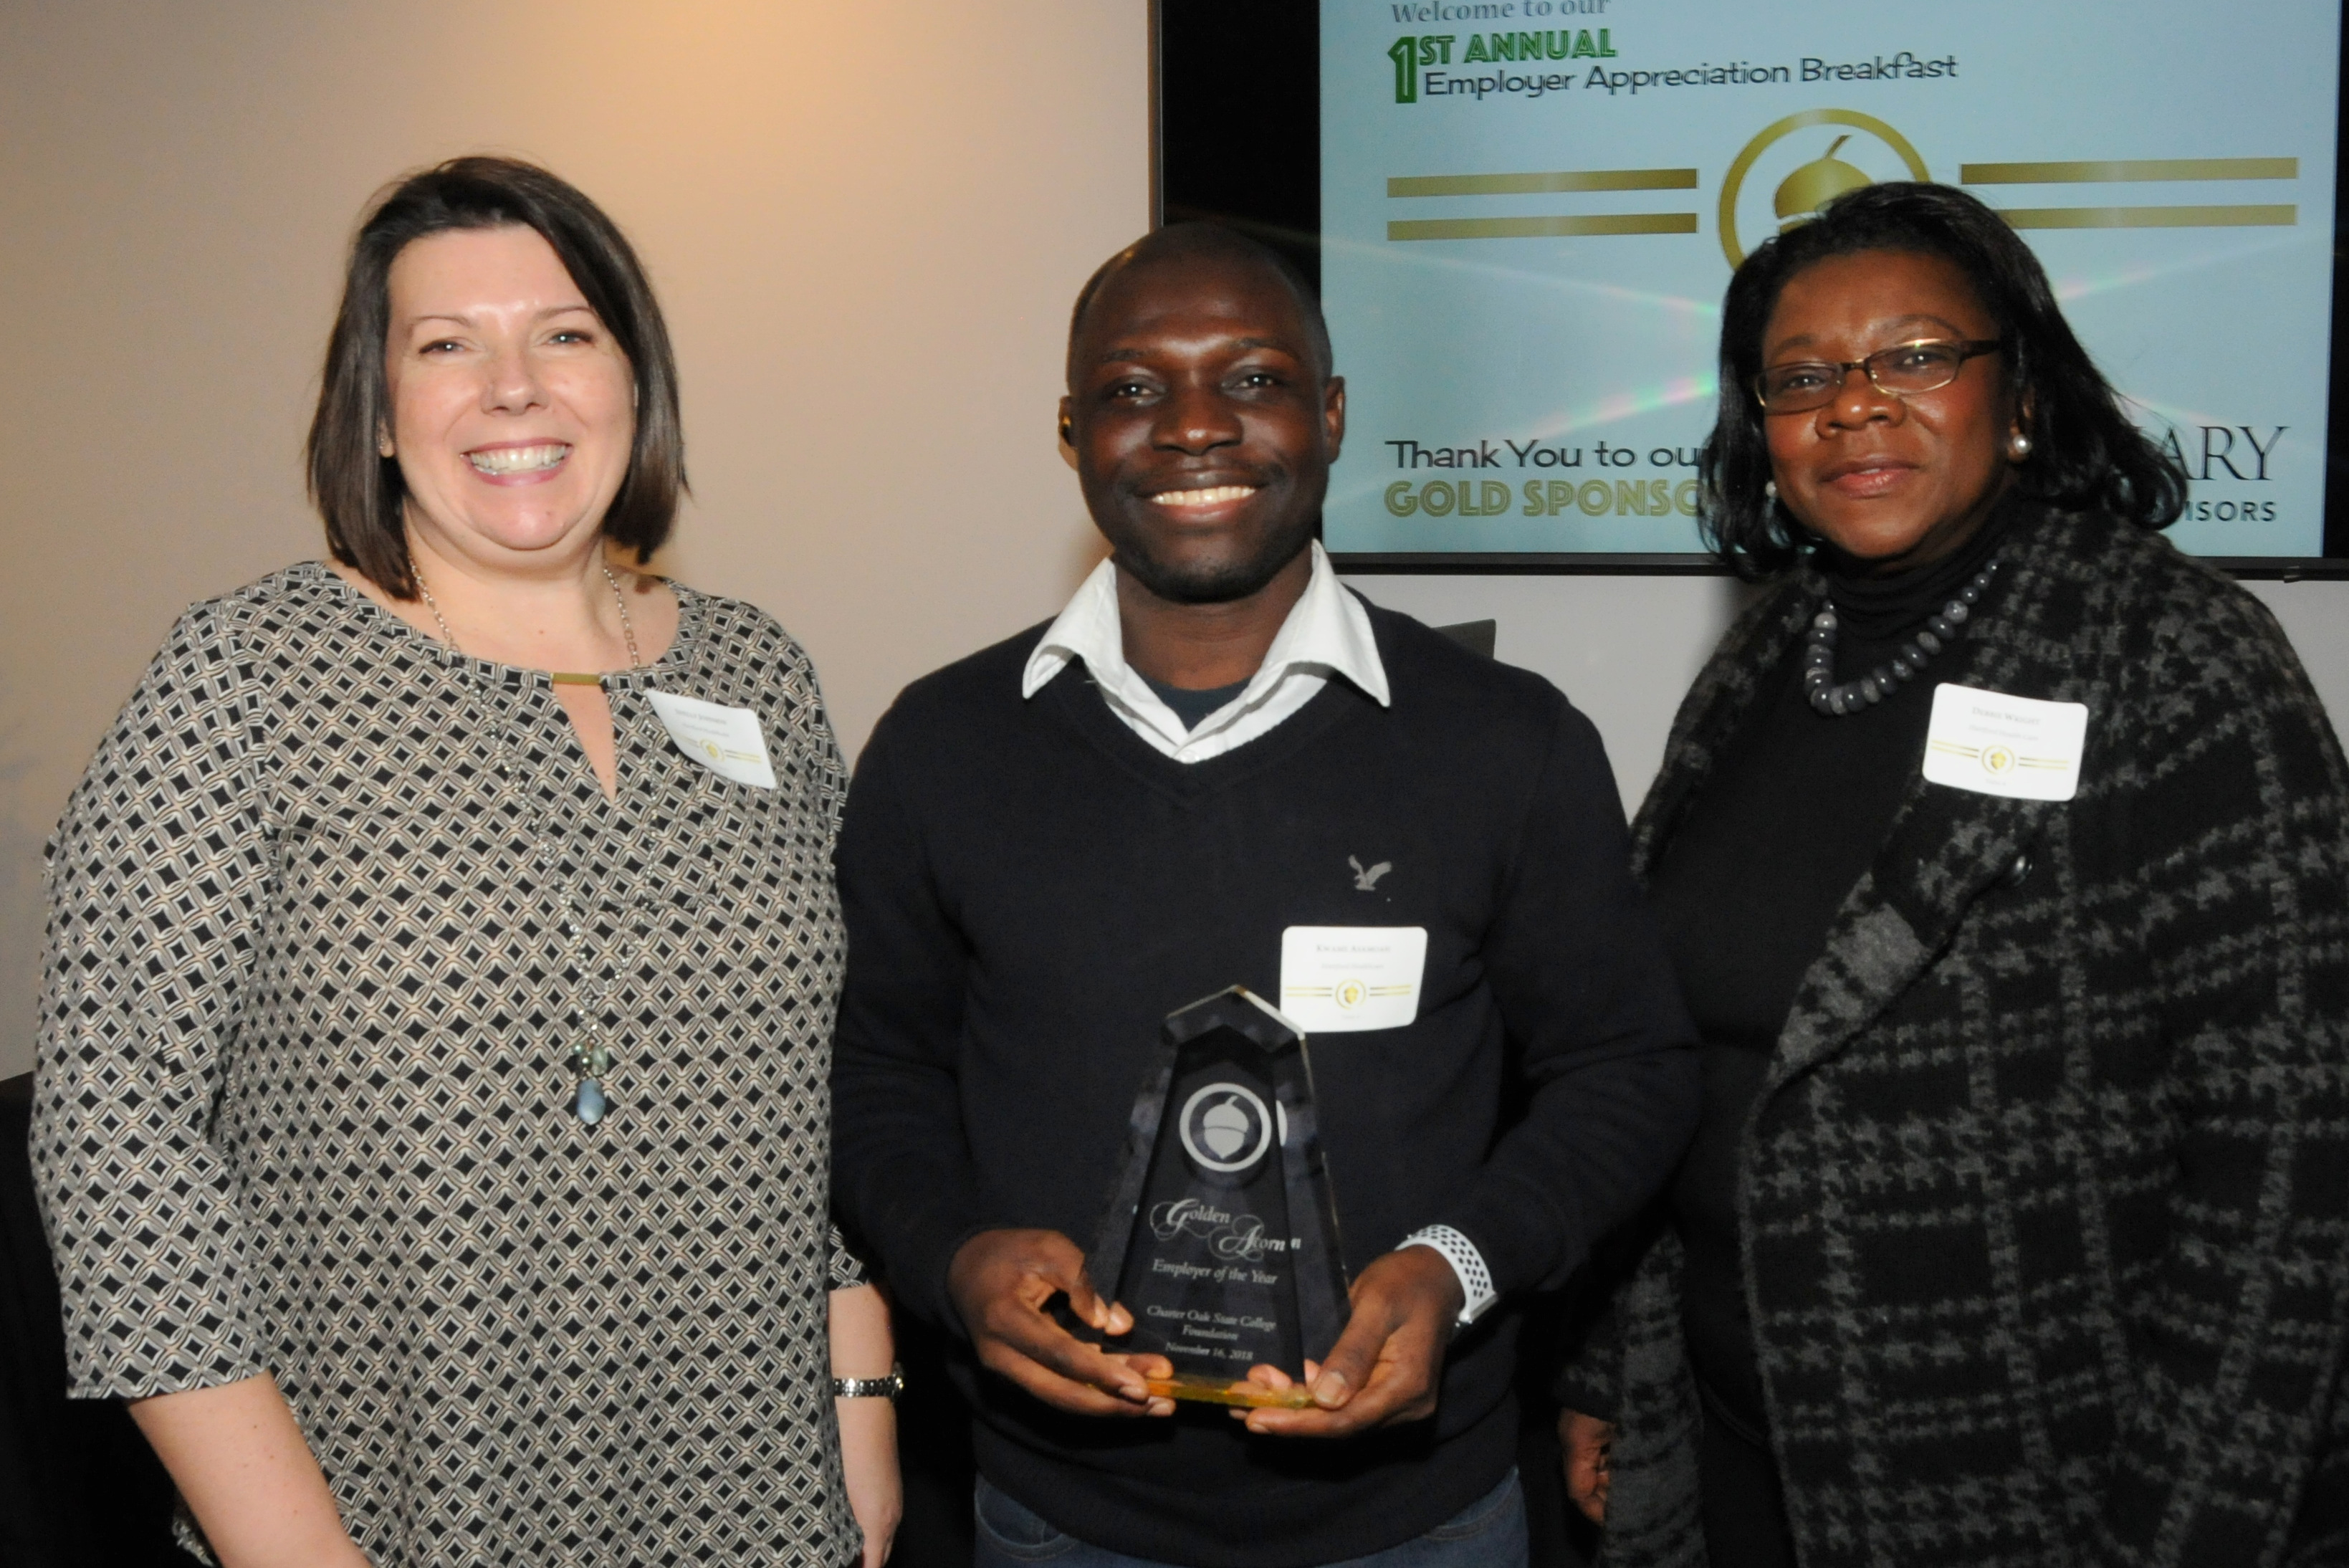 The 2018 Golden Acorn Employer of the Year - Hartford Healthcare!  From left to right, Shelly Johnson, Kwame Asamoah, COSC Student and Scholarship Recipient, Debbi Wright, RHIA, System Director of Health Information Management and Guest Speaker. (Missing from the picture is supervisor, Celia Rodriguez.)